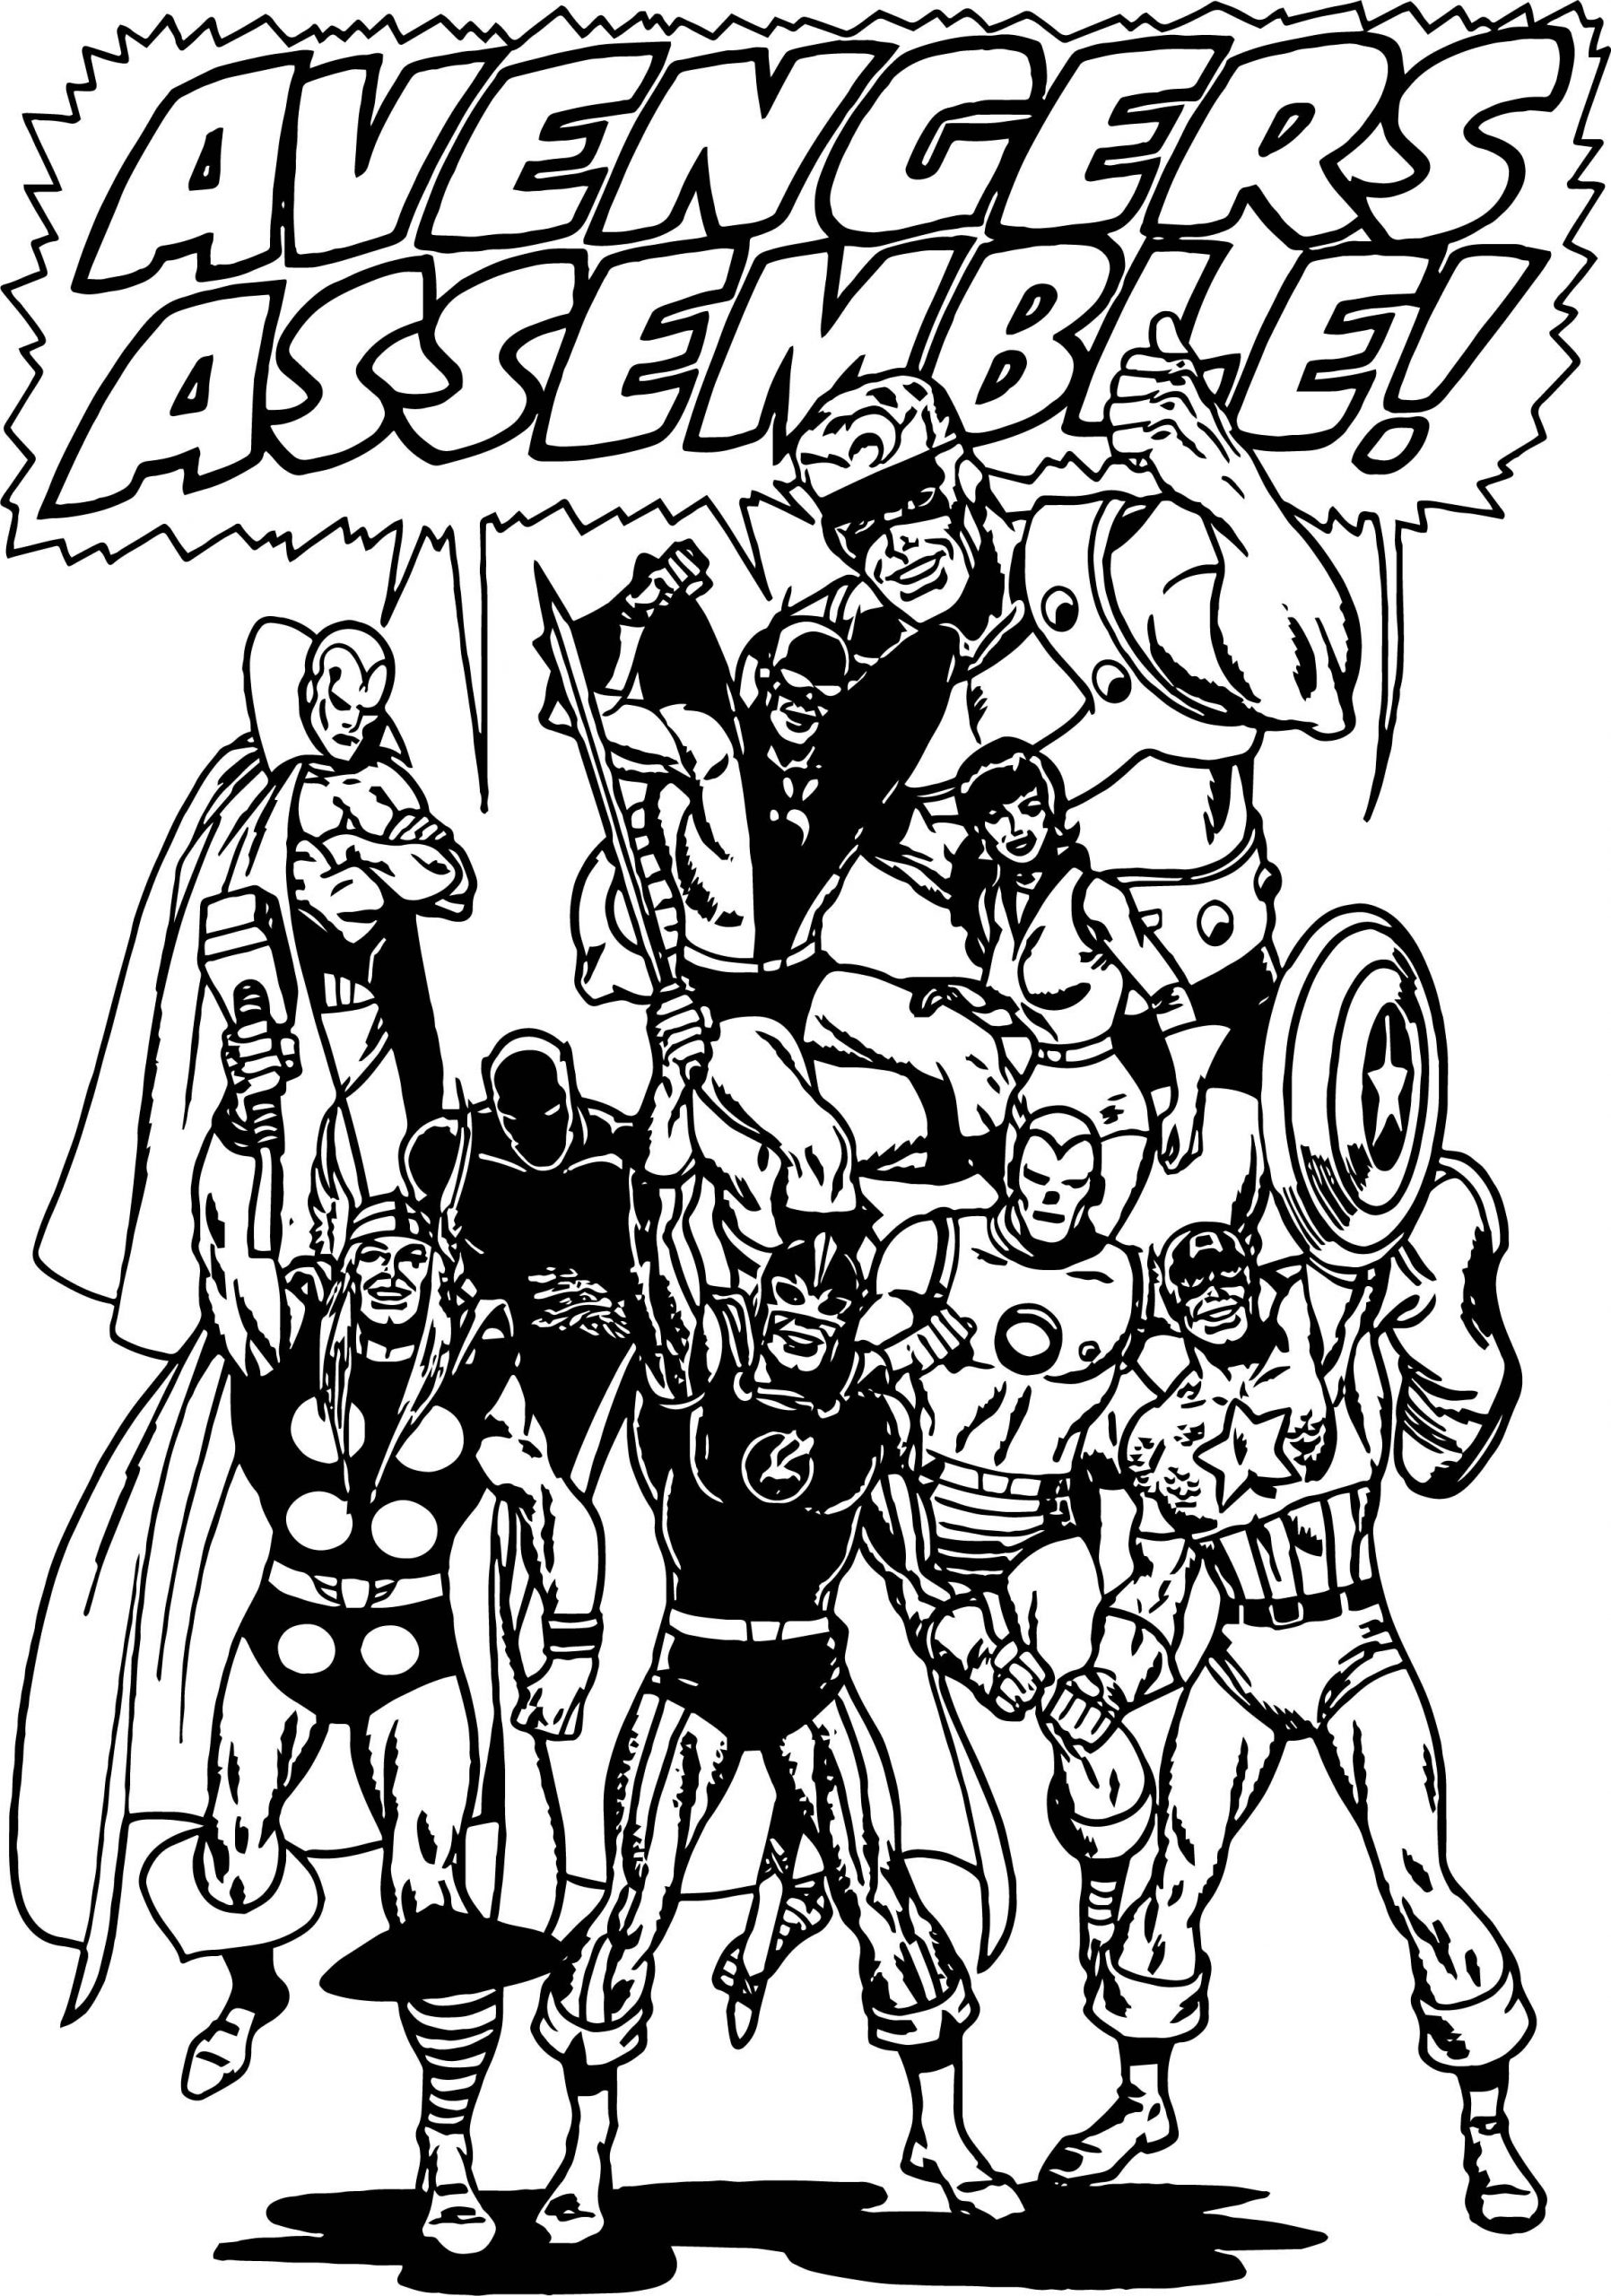 Awesome Avengers Assemble Coloring Page | Avengers tout Coloriage Avengers 2